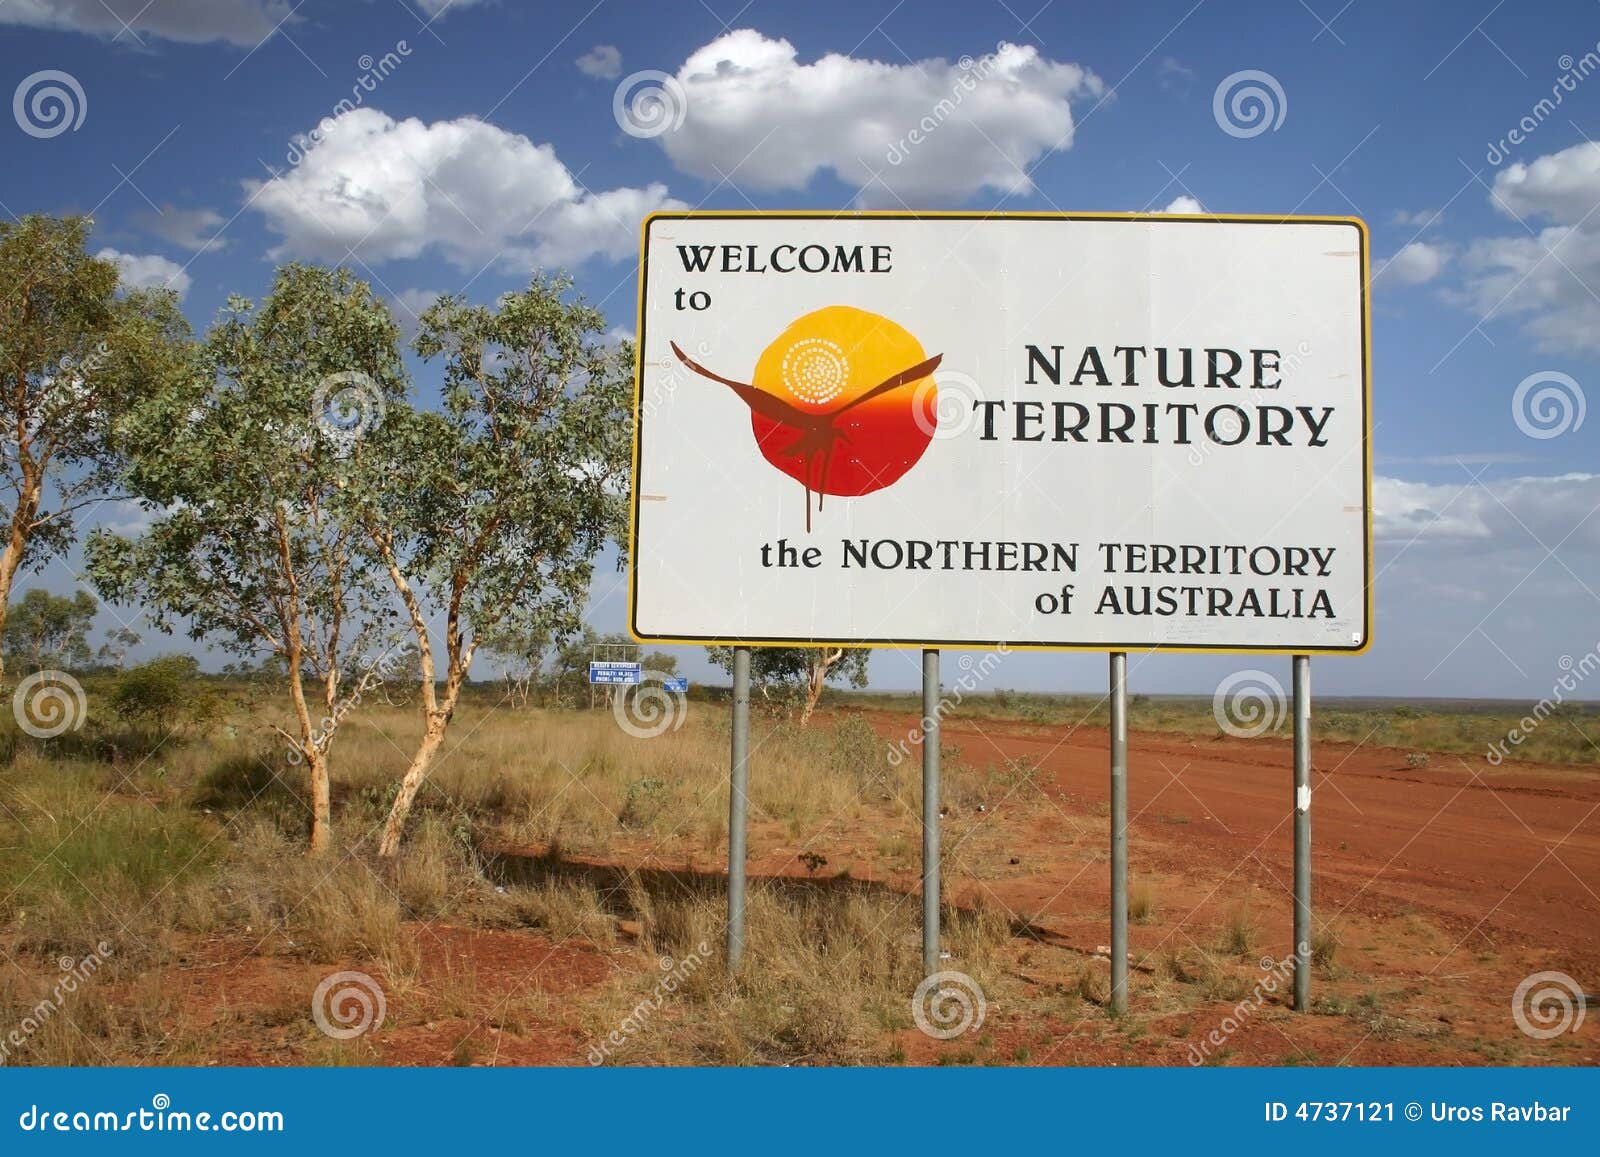 northern territory sign